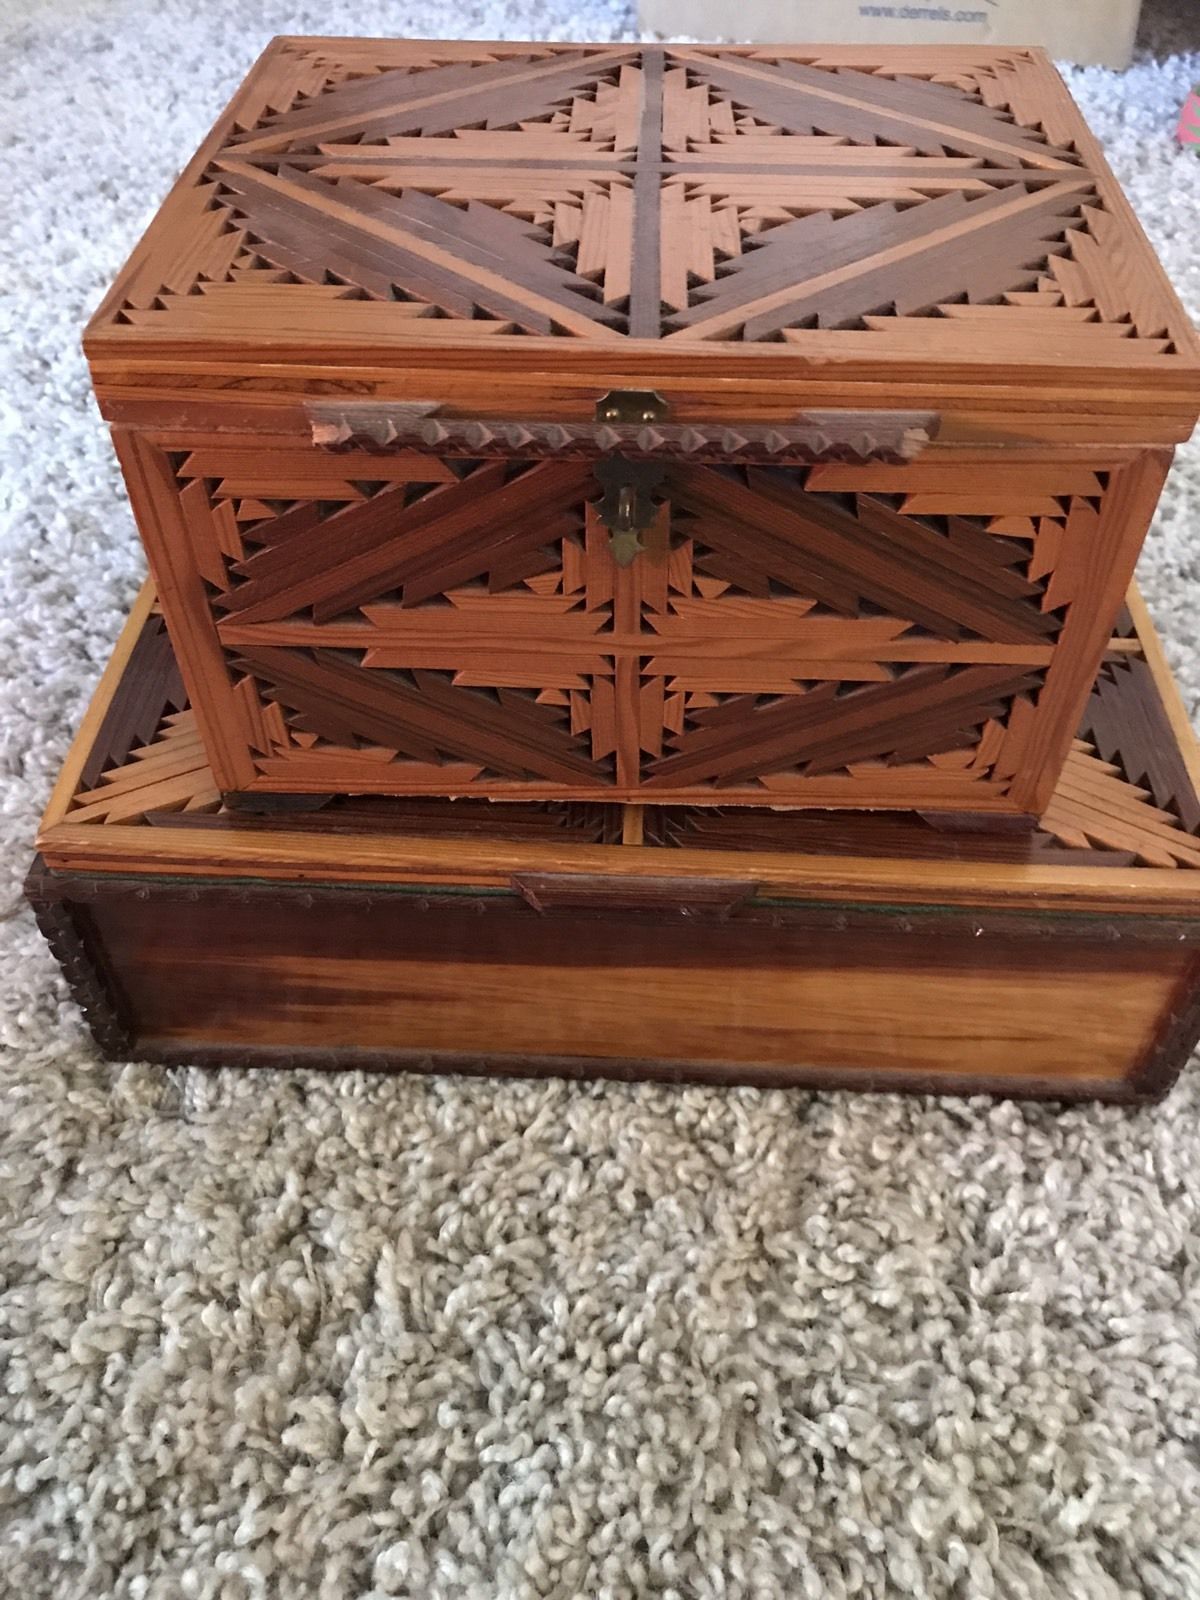 Amazing Tramp Art Wood Boxes Vintage Collectible One Of A Kind